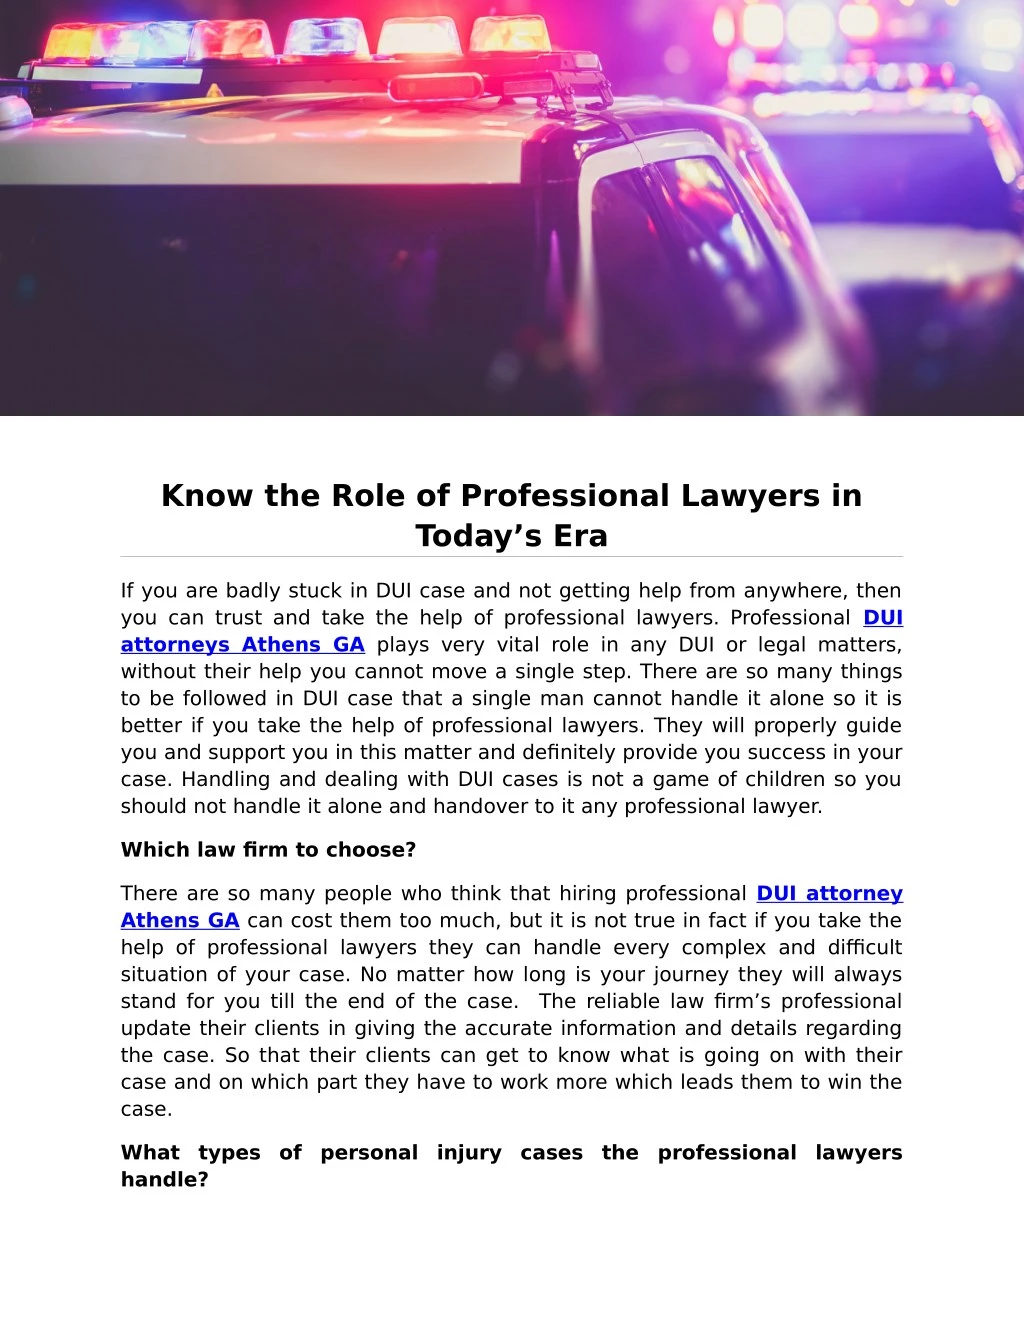 know the role of professional lawyers in today